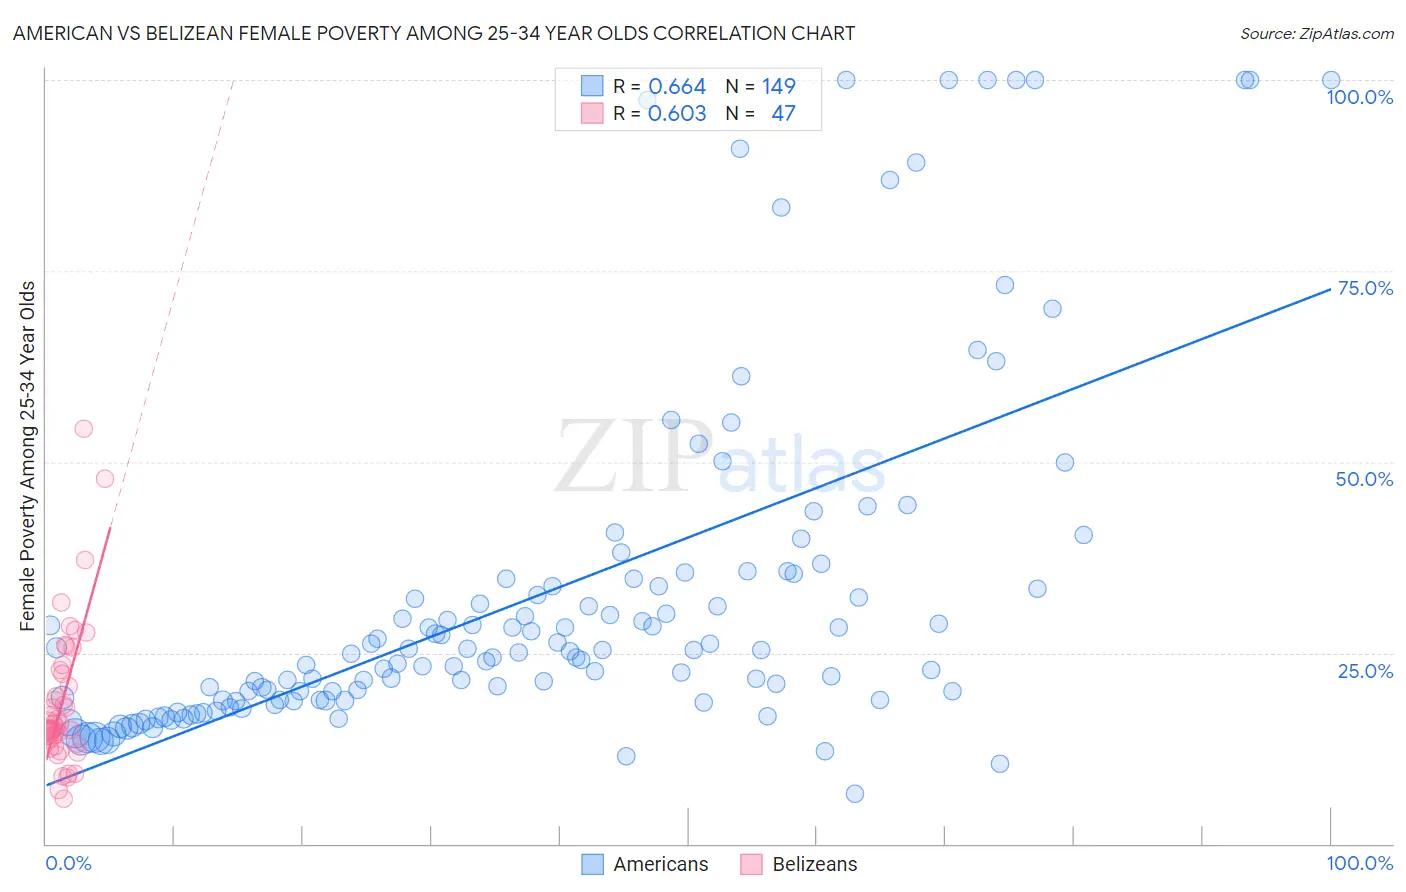 American vs Belizean Female Poverty Among 25-34 Year Olds